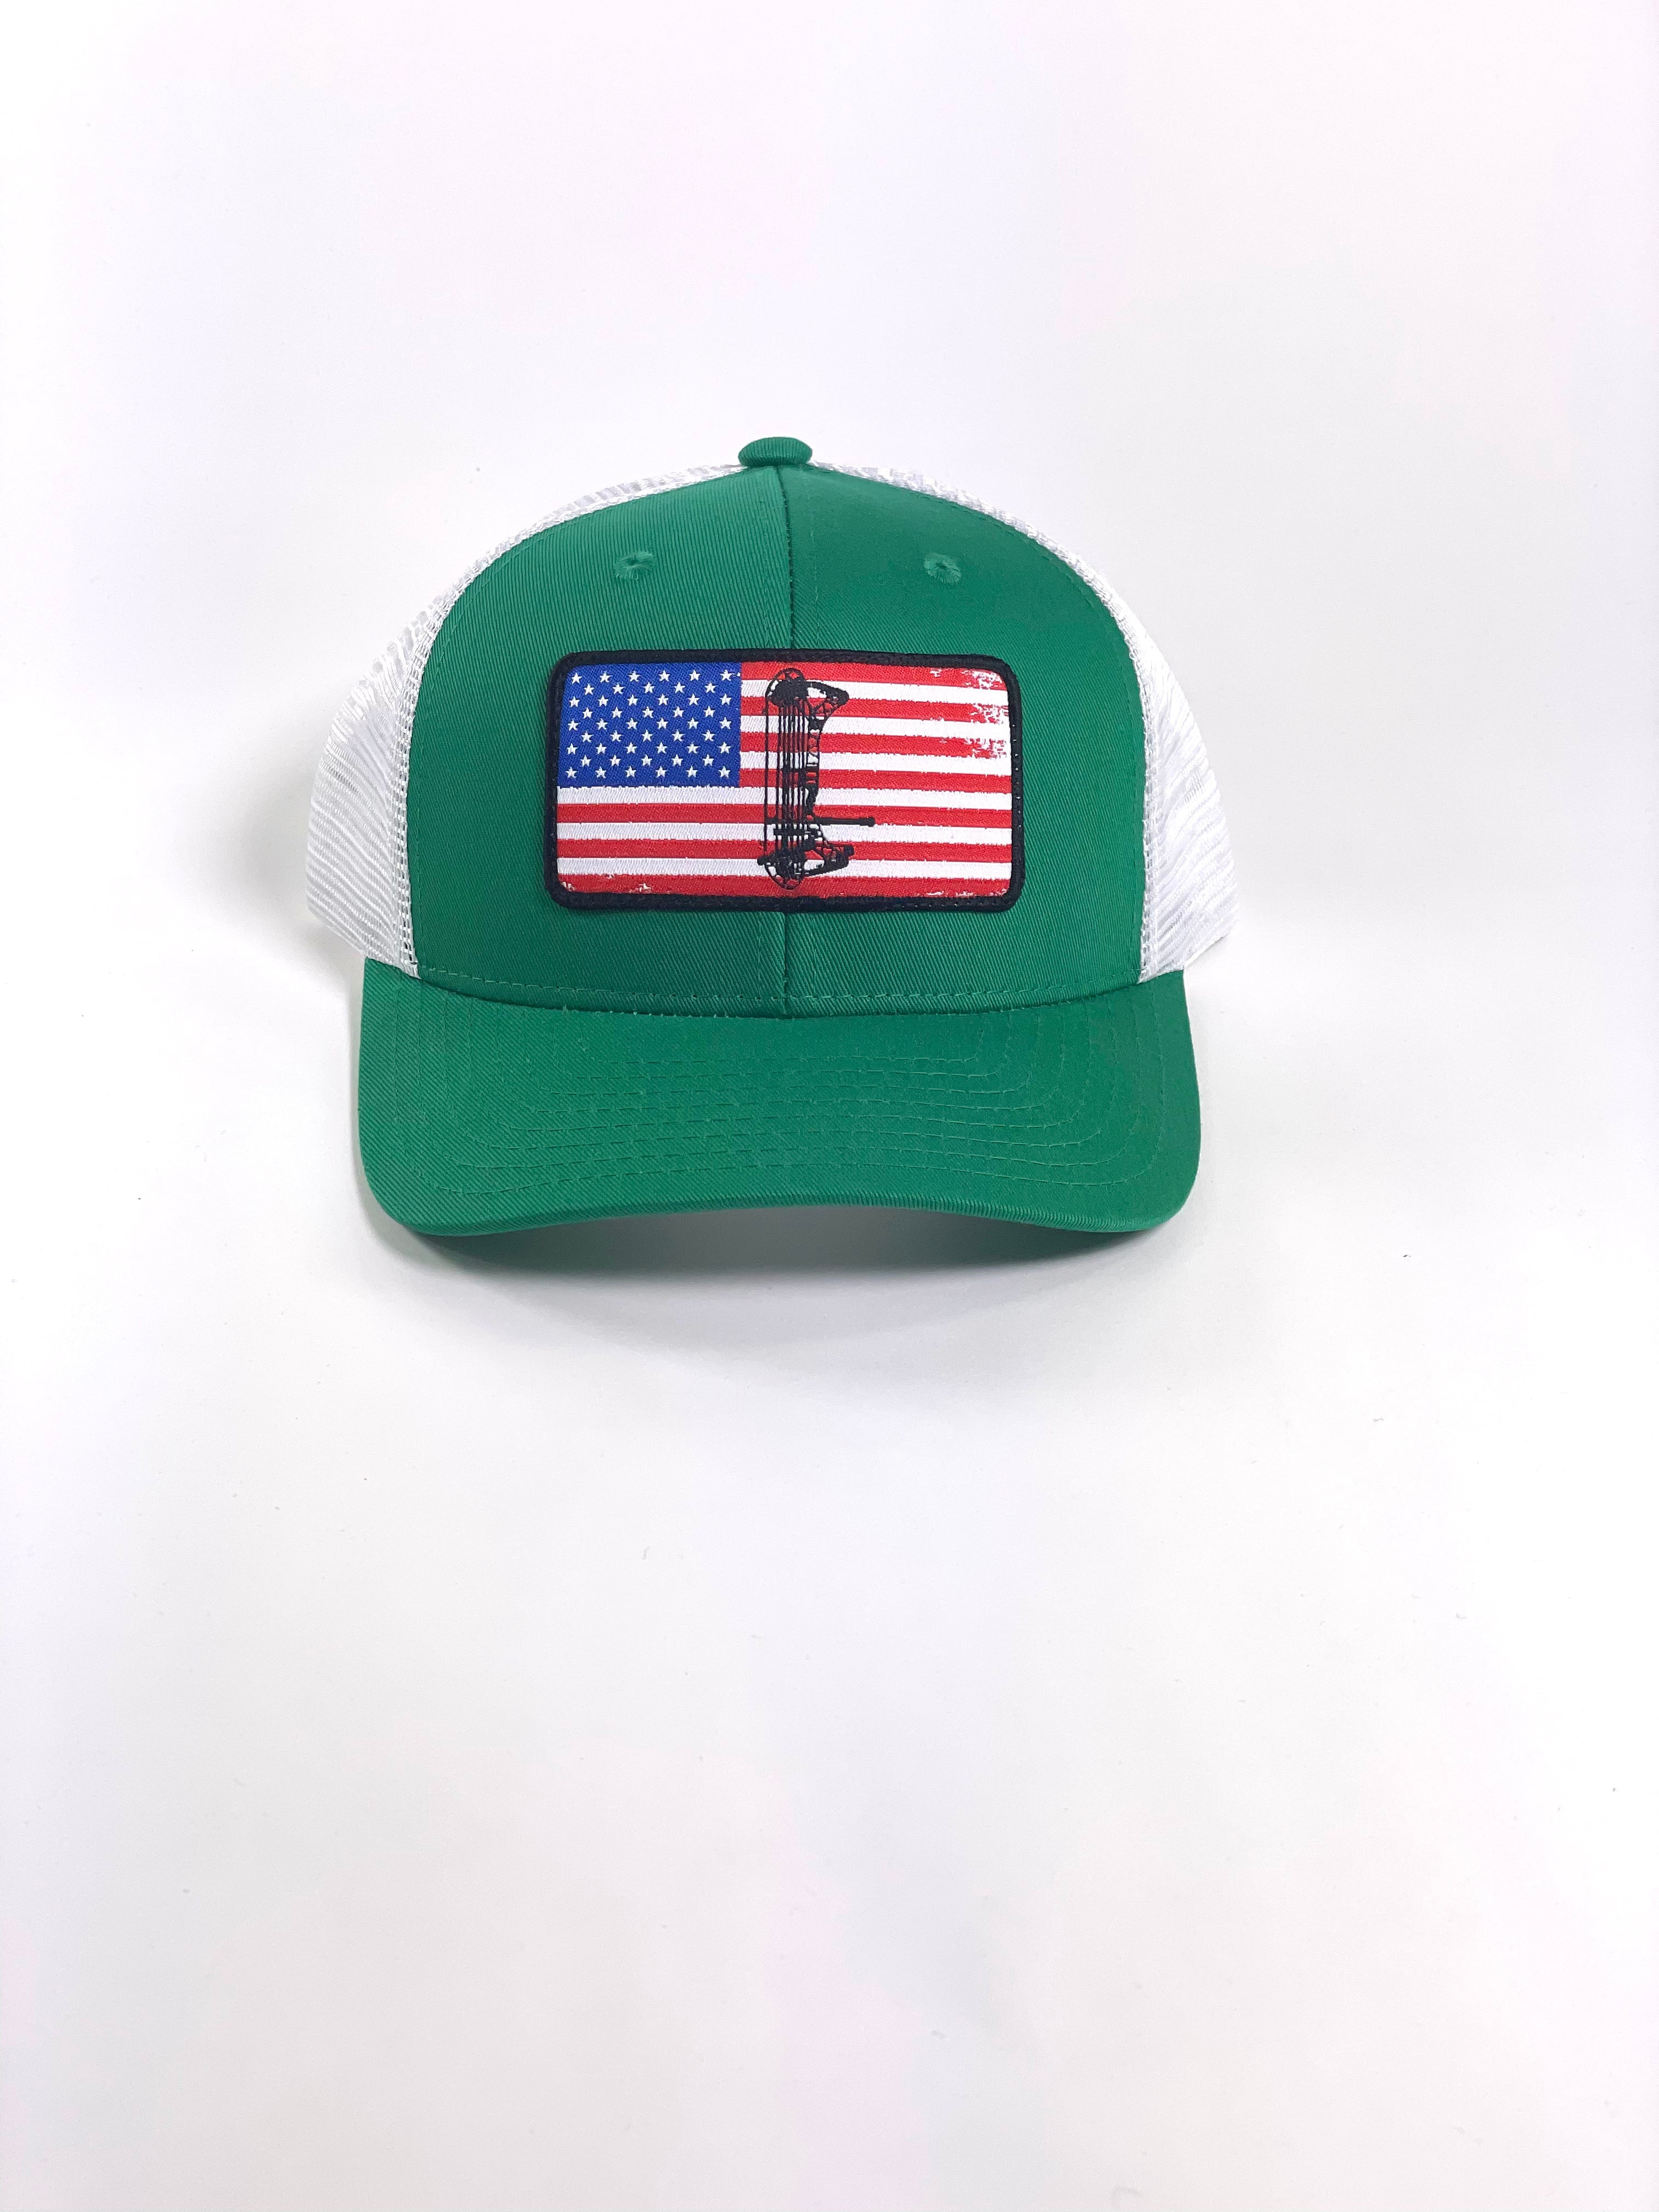 BOW AMERICA - KELLY GREEN/WHITE HAT